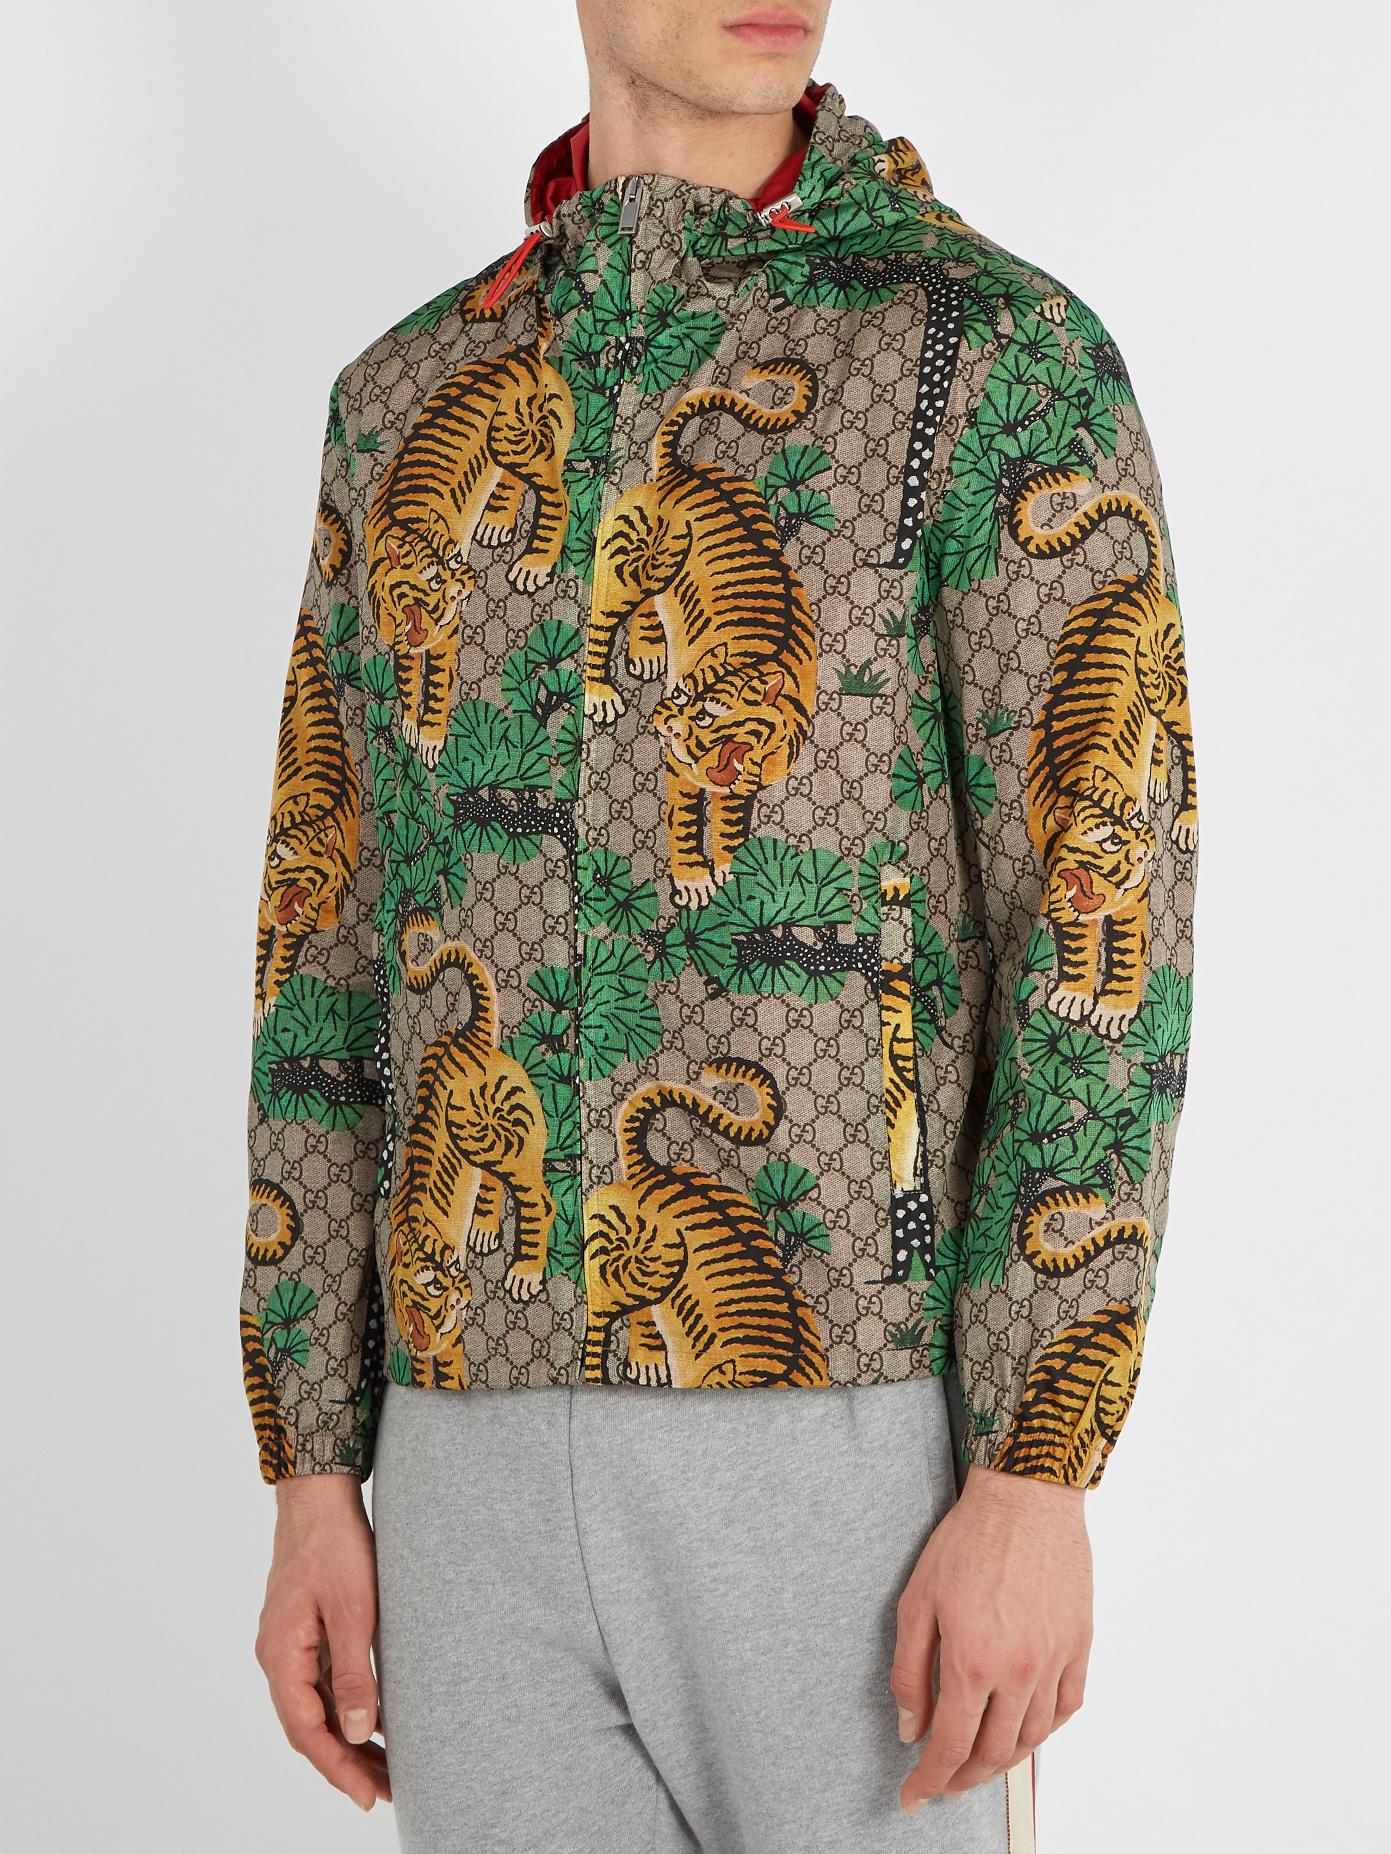 Gucci Synthetic Bengal Tiger Print Jacket in Green for Men - Lyst